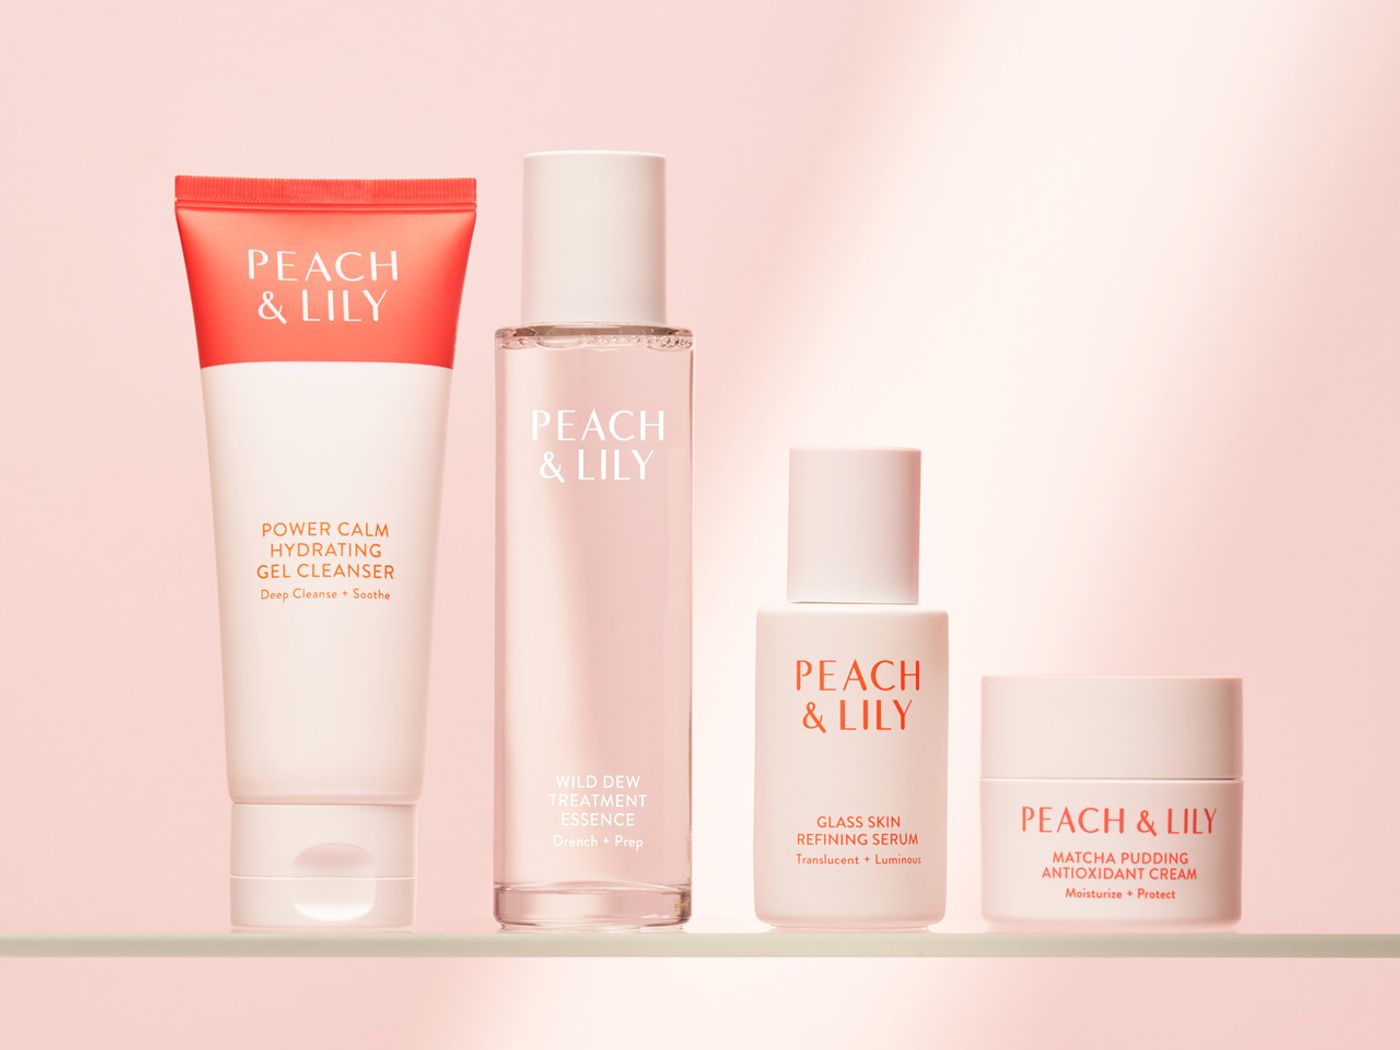 Why Cult Beauty Brand Fresh Should Be In Your Skincare Regime